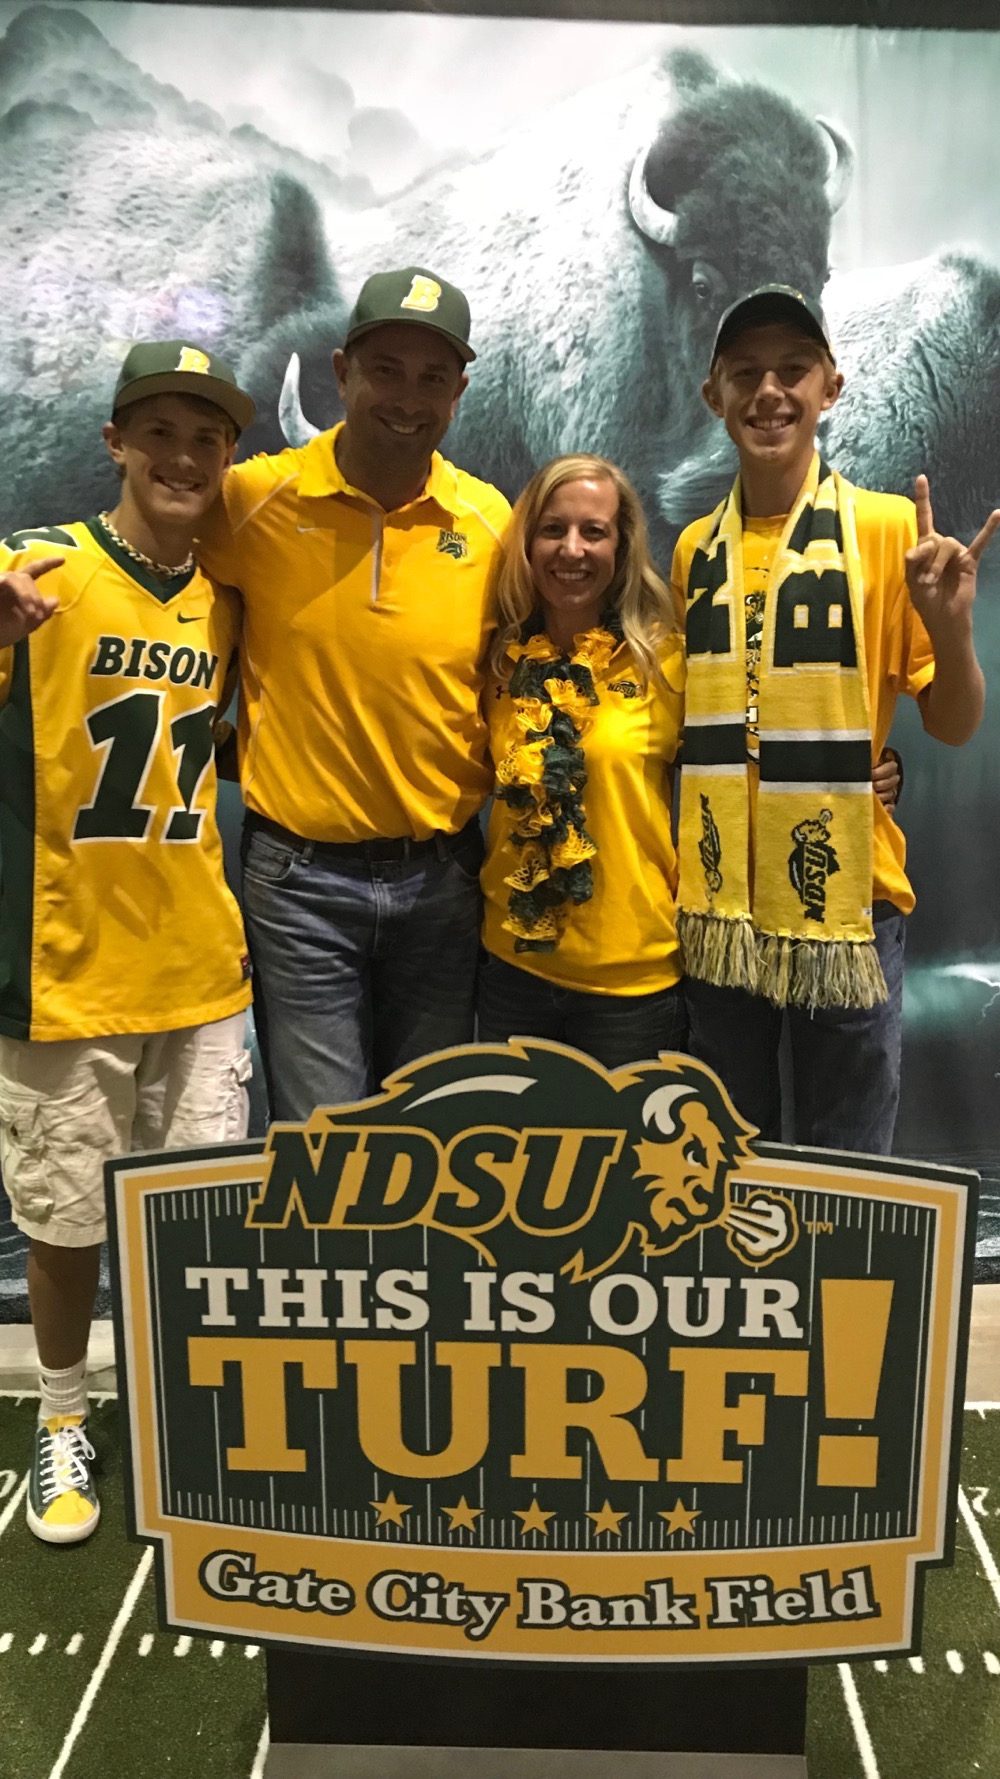 Brent Parmer made the trip back to NDSU from his new home in Kentucky. During his visit, Parmer toured the new track and field facilities and reconnected with his former coach, Don Larson.